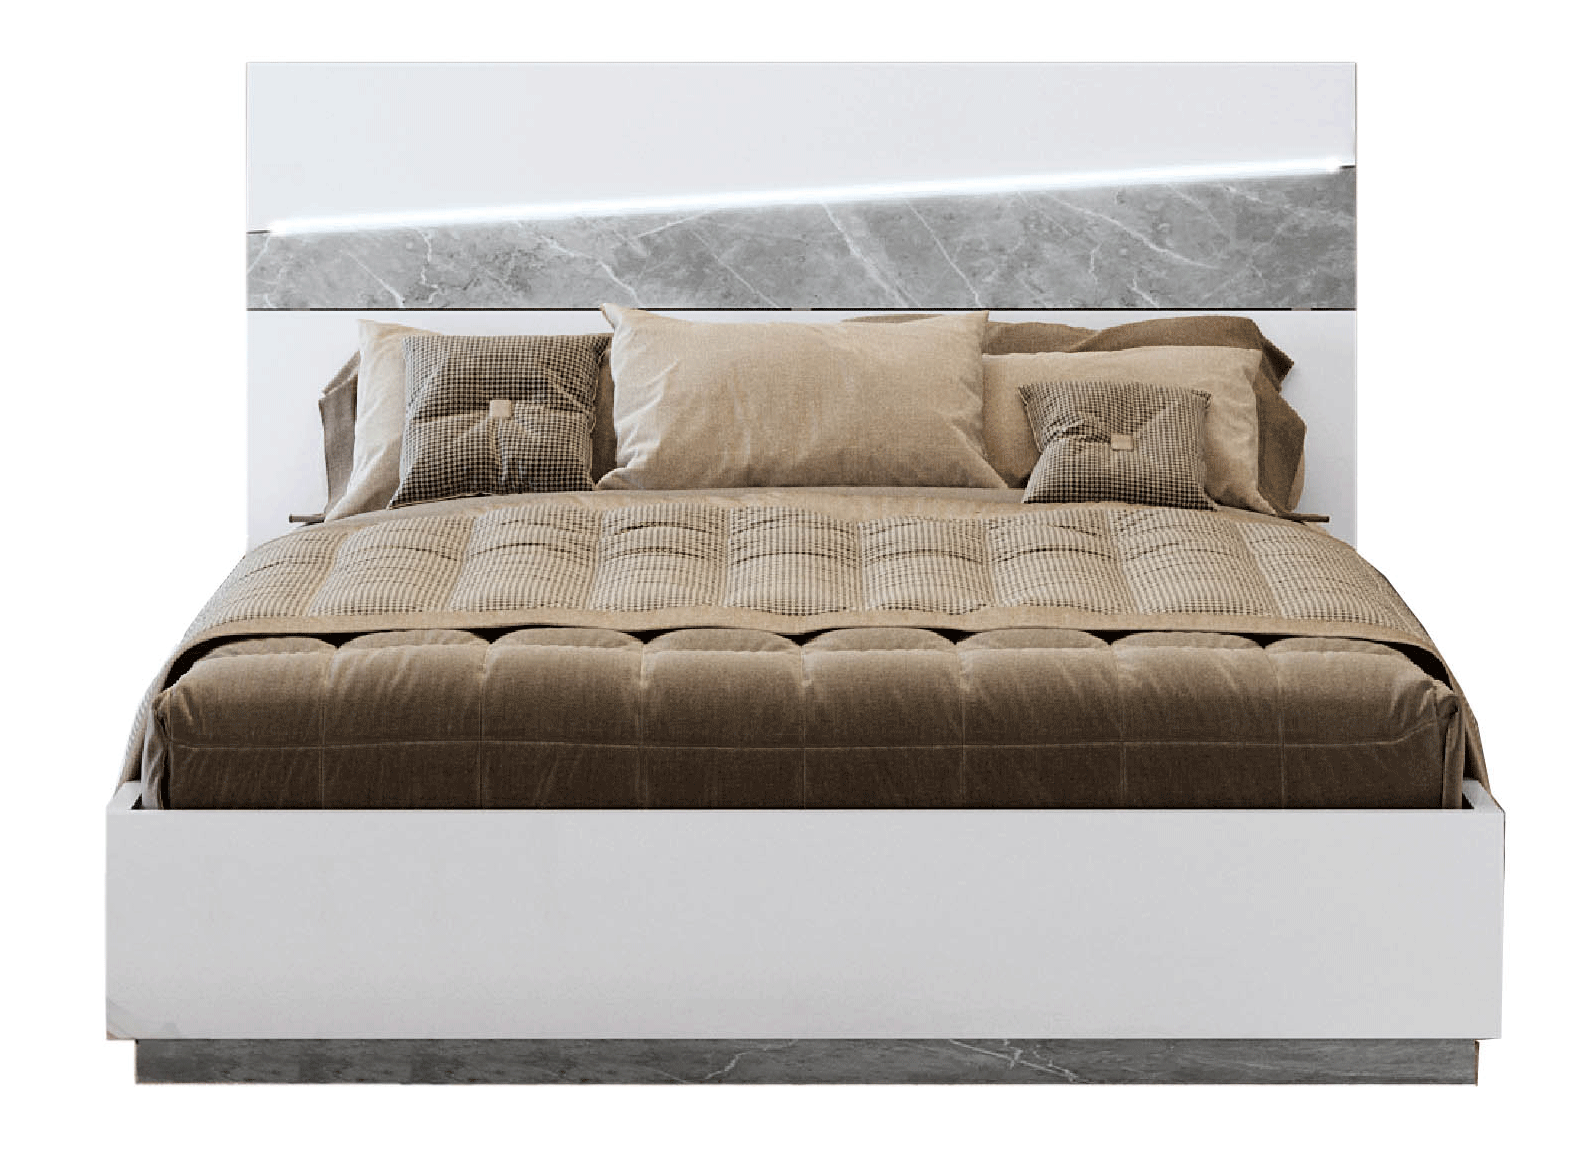 Clearance Bedroom Alba Bed w/ Light, Italy